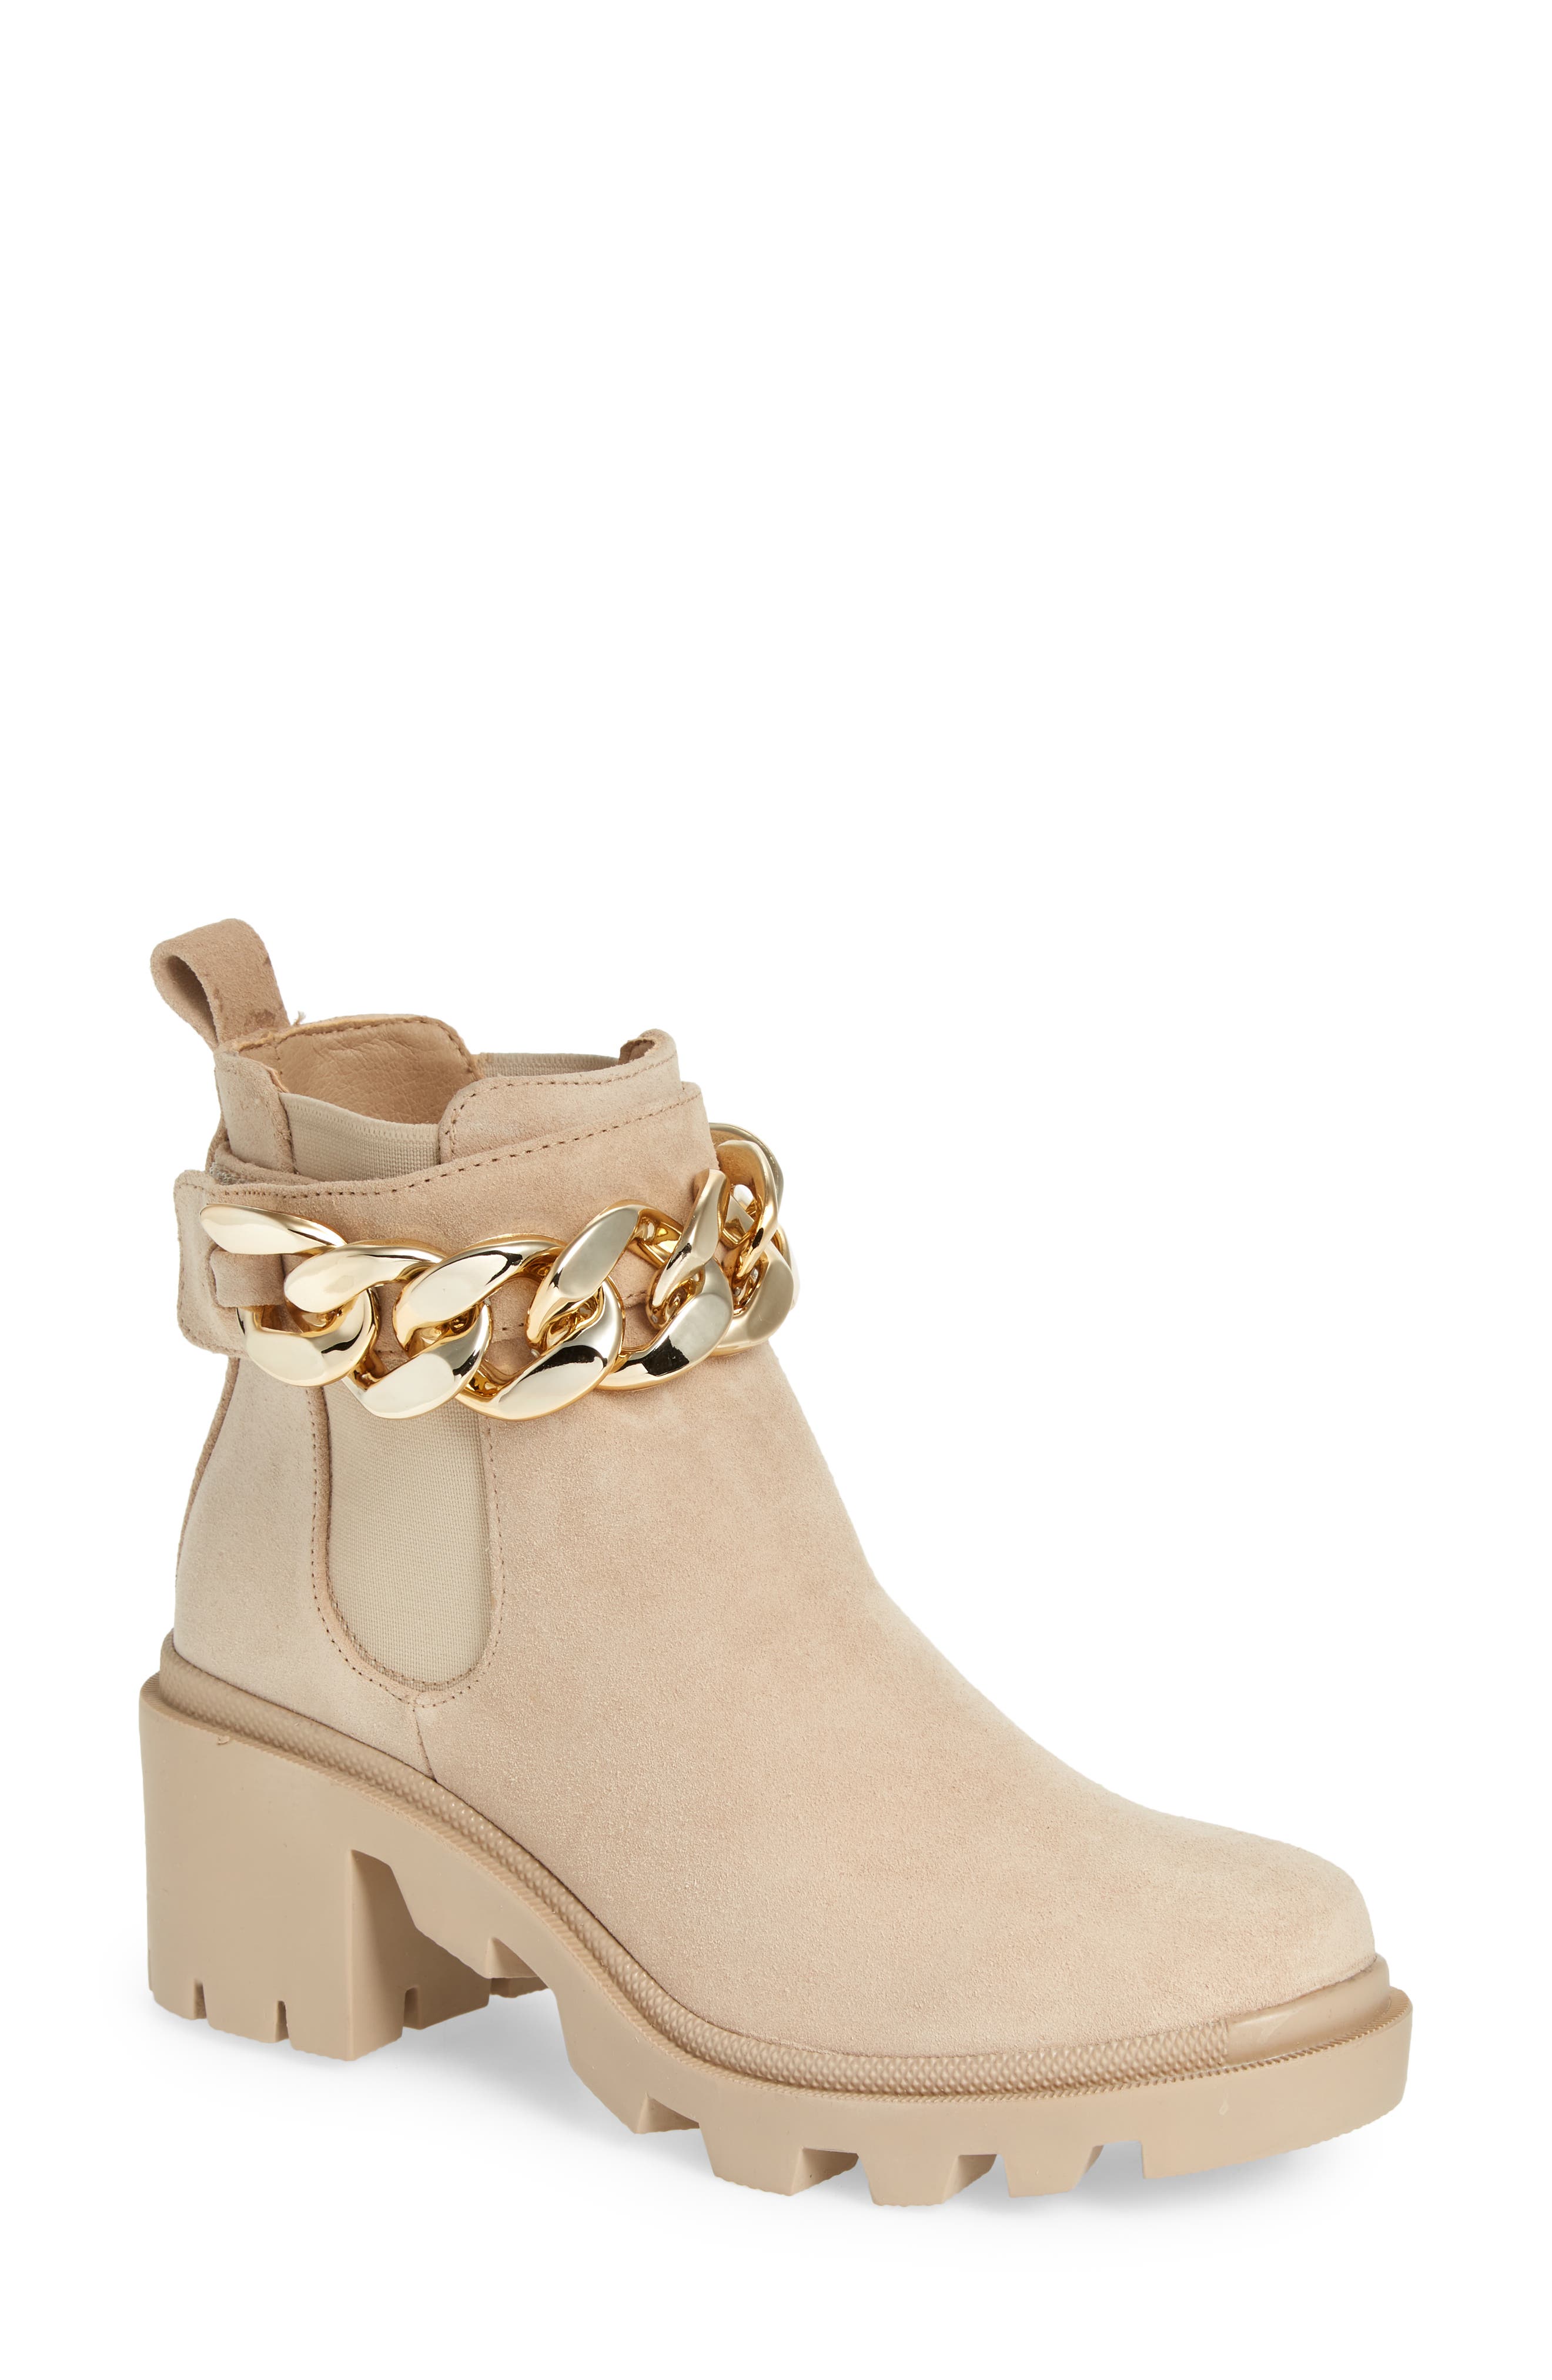 Steve Madden Amulet Chain Bootie in Sand Suede